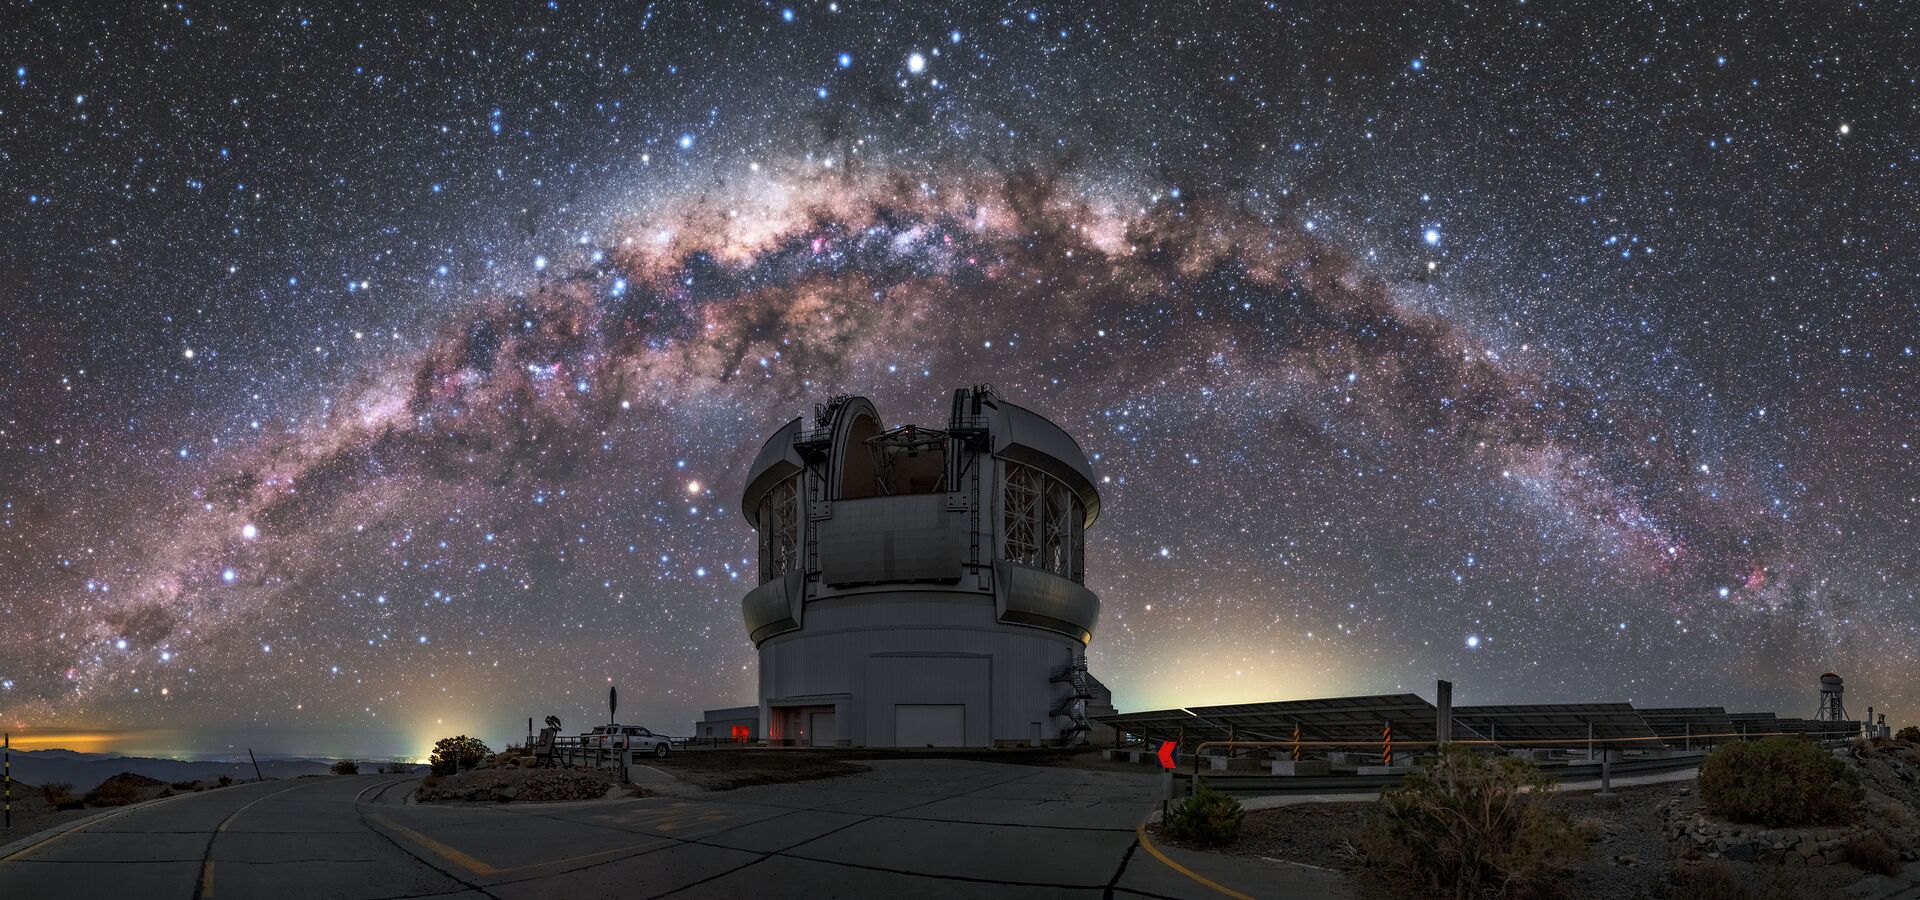 Dark Sky Protection: We Are Losing the Universe